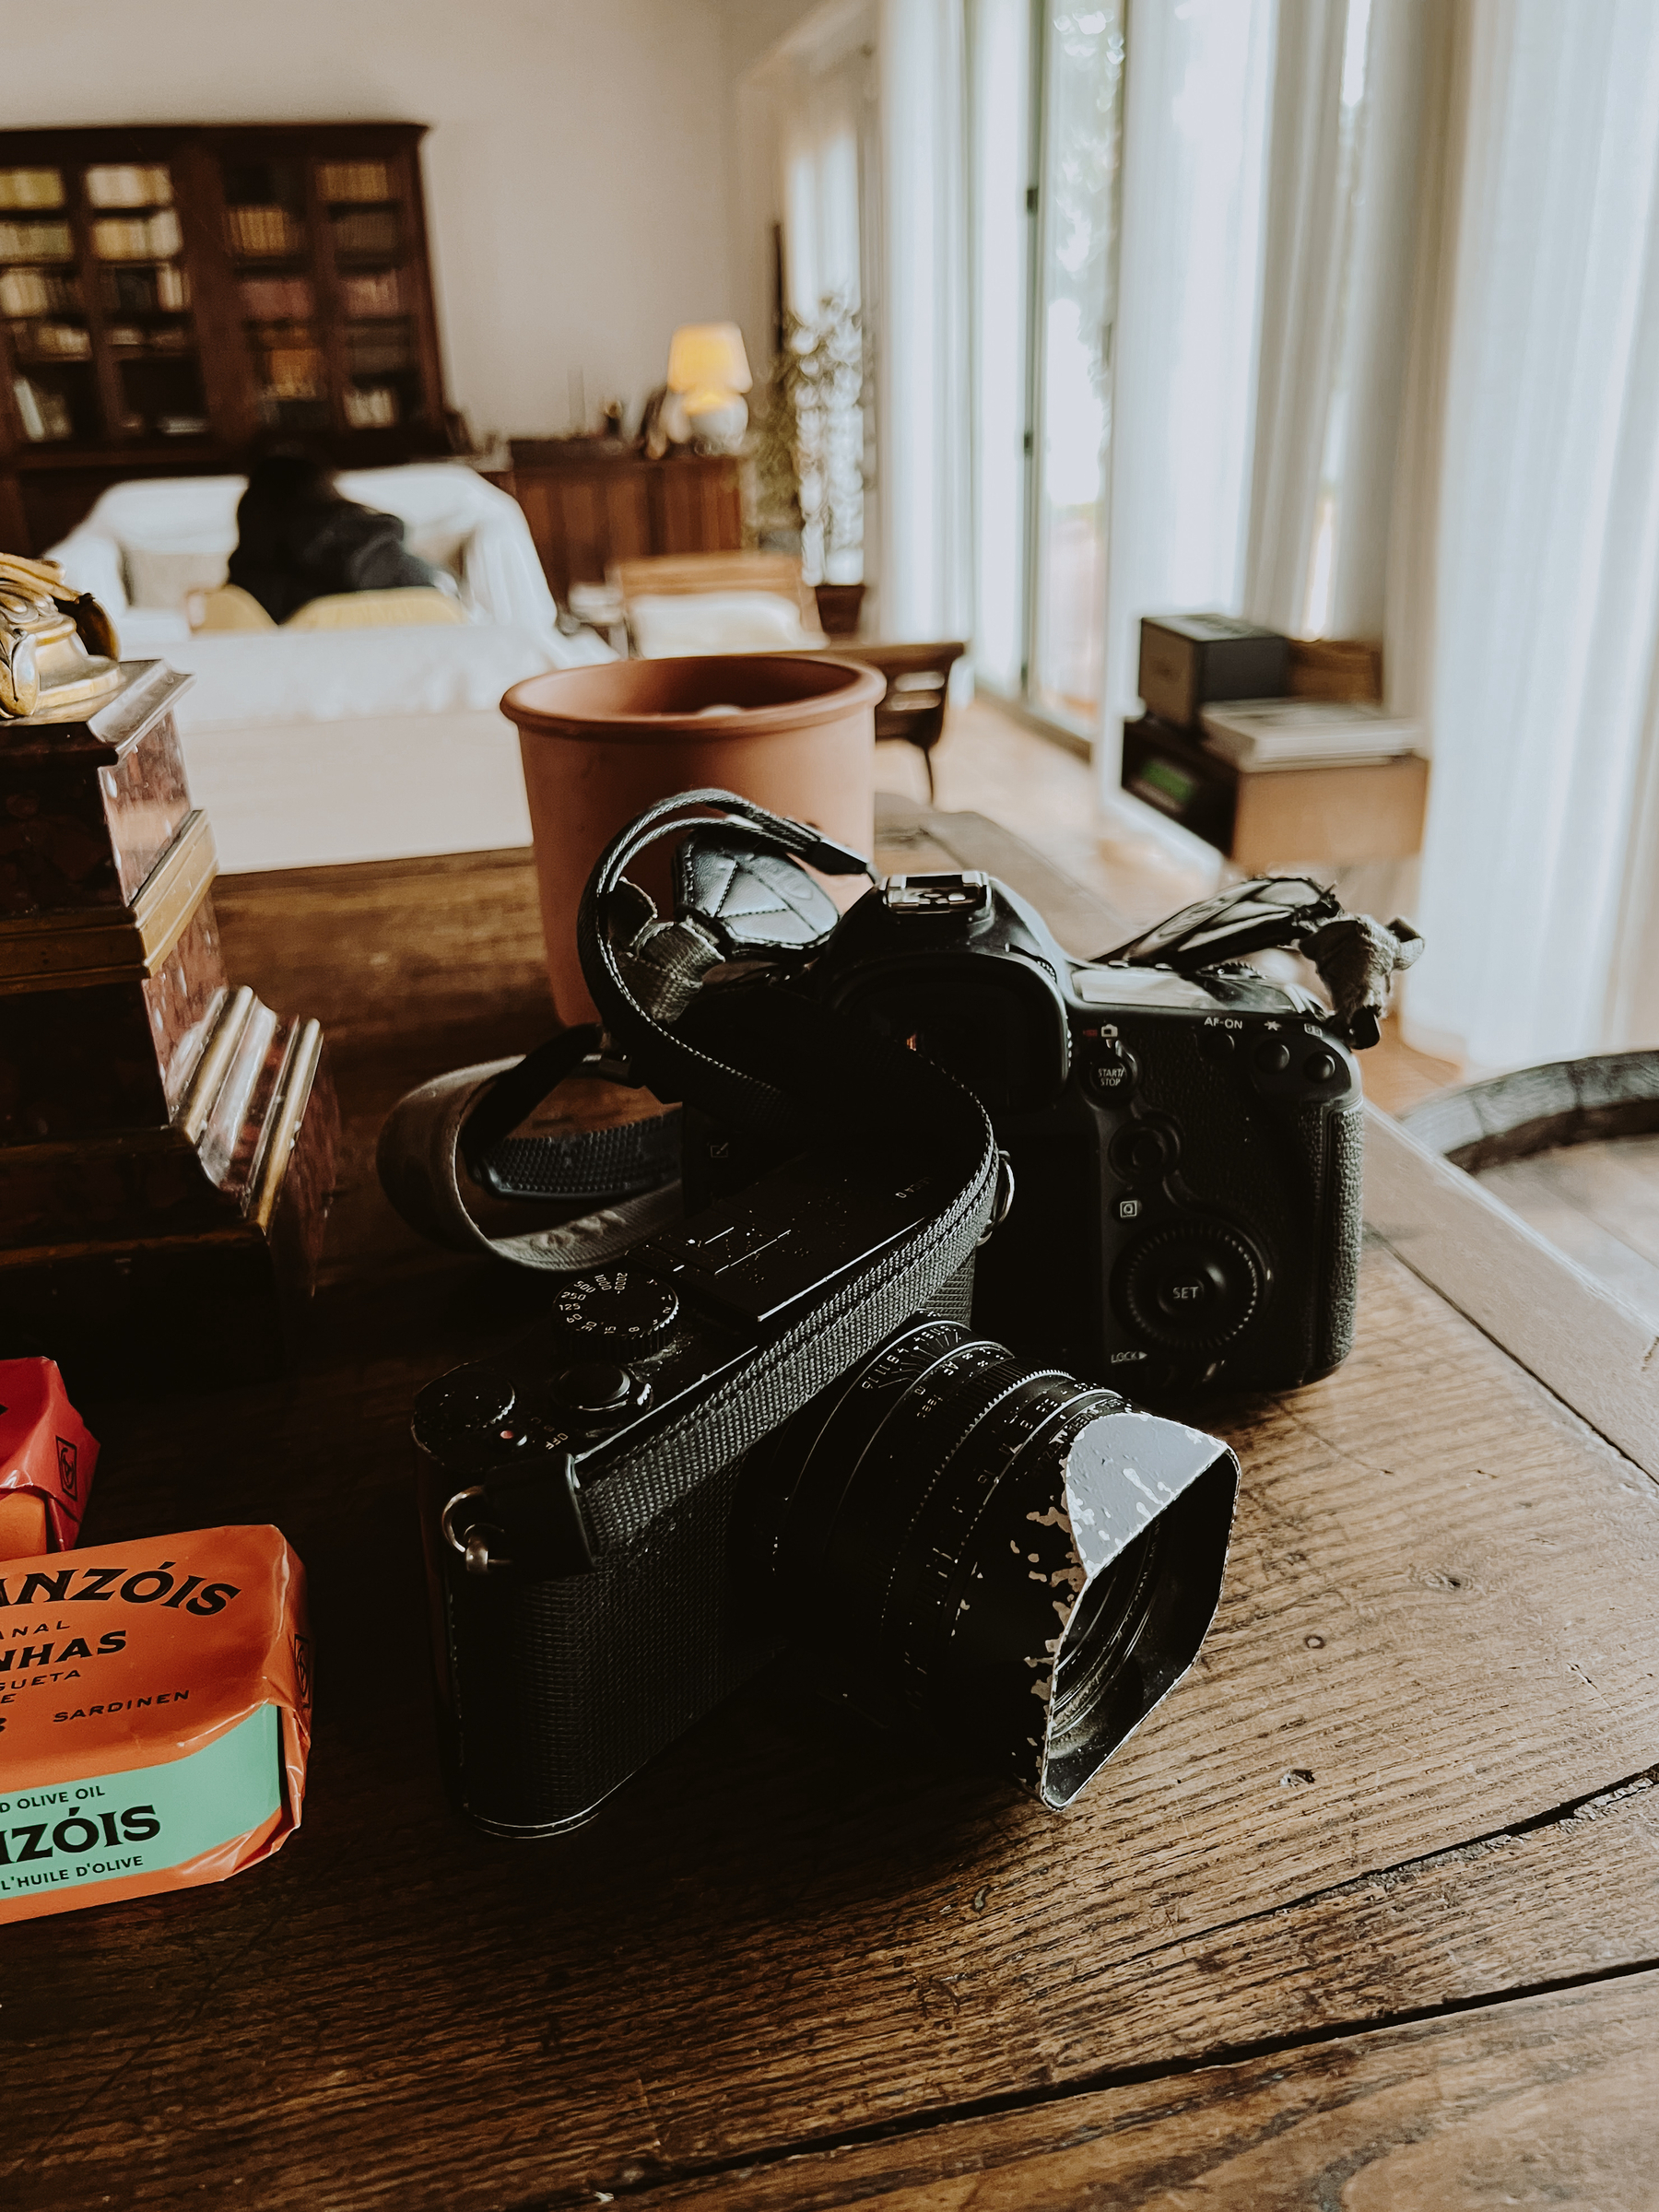 A camera with a strap placed on a wooden table, with its lens hood visibly worn and chipped. In the background, there&rsquo;s a cozy room with bookshelves, a bed, and a lamp, all bathed in warm light.